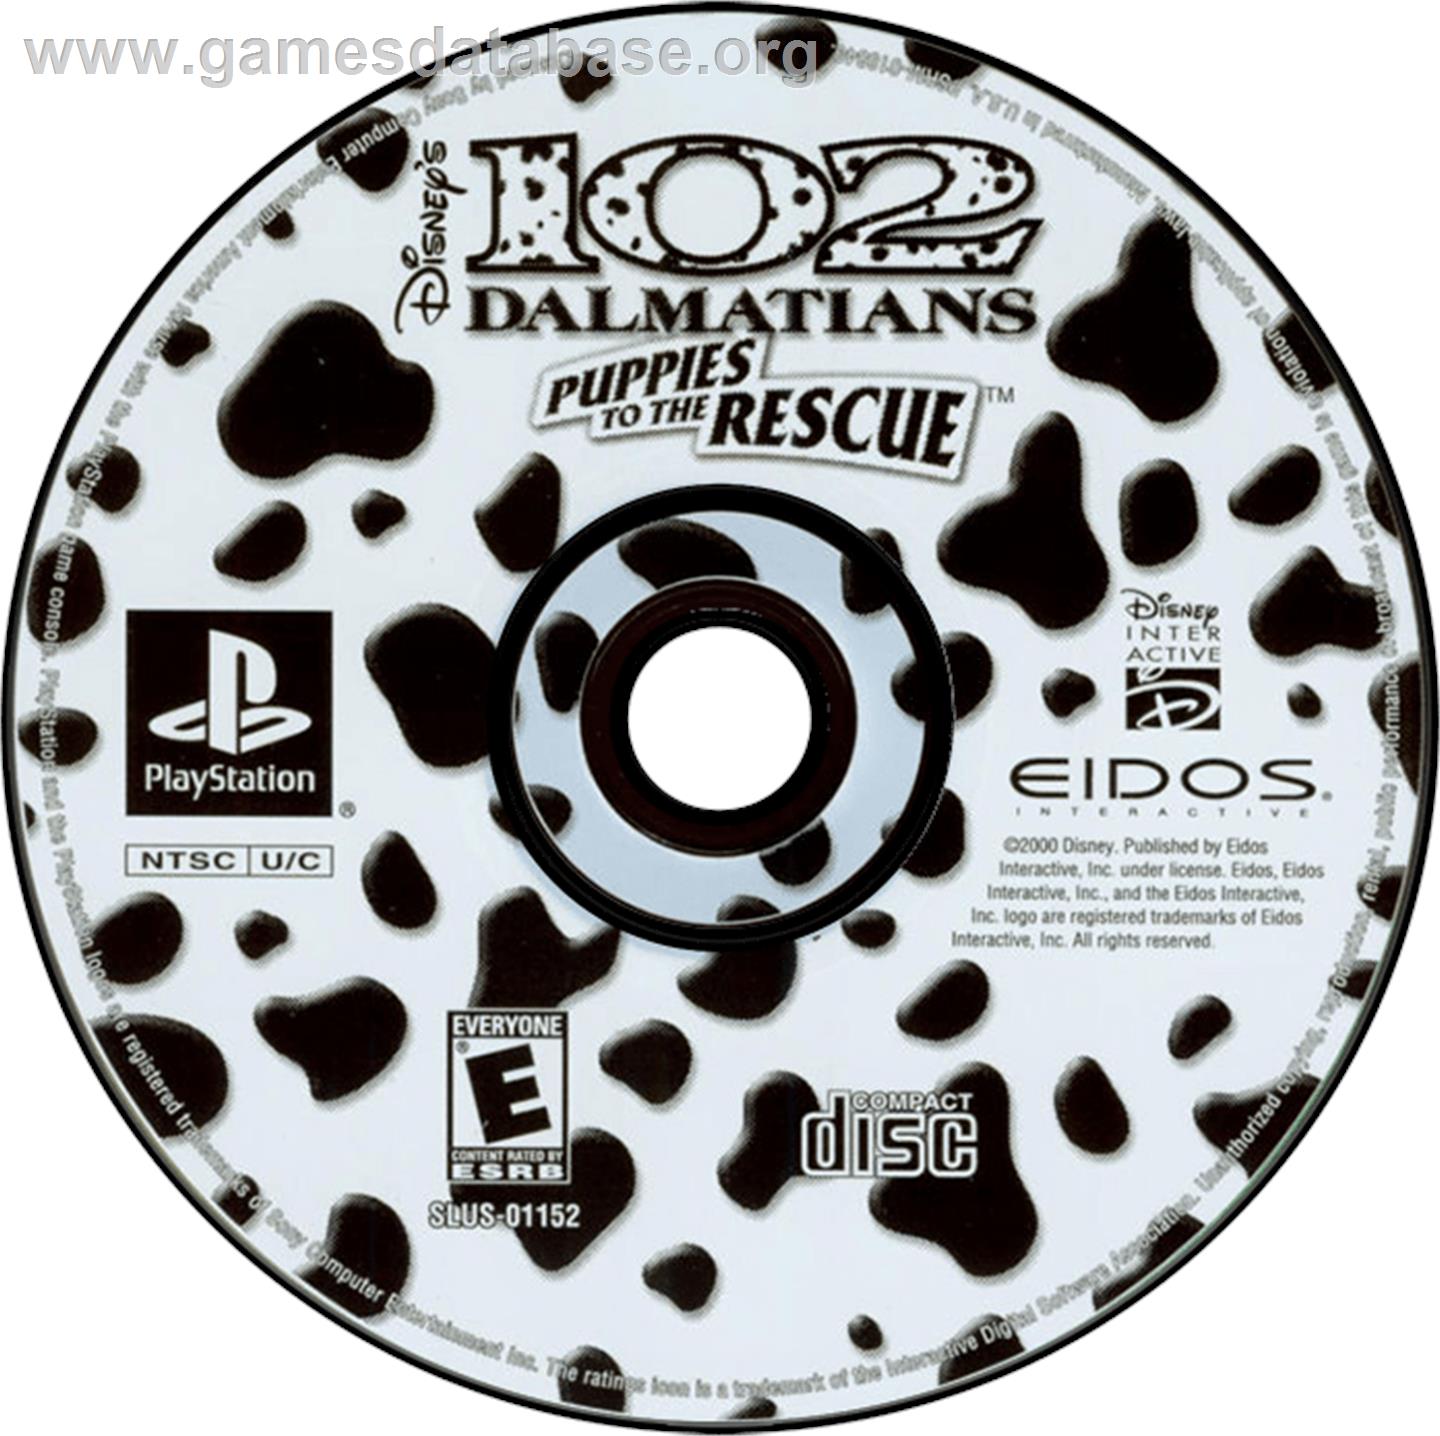 Disney's 102 Dalmatians: Puppies to the Rescue - Sony Playstation - Artwork - Disc